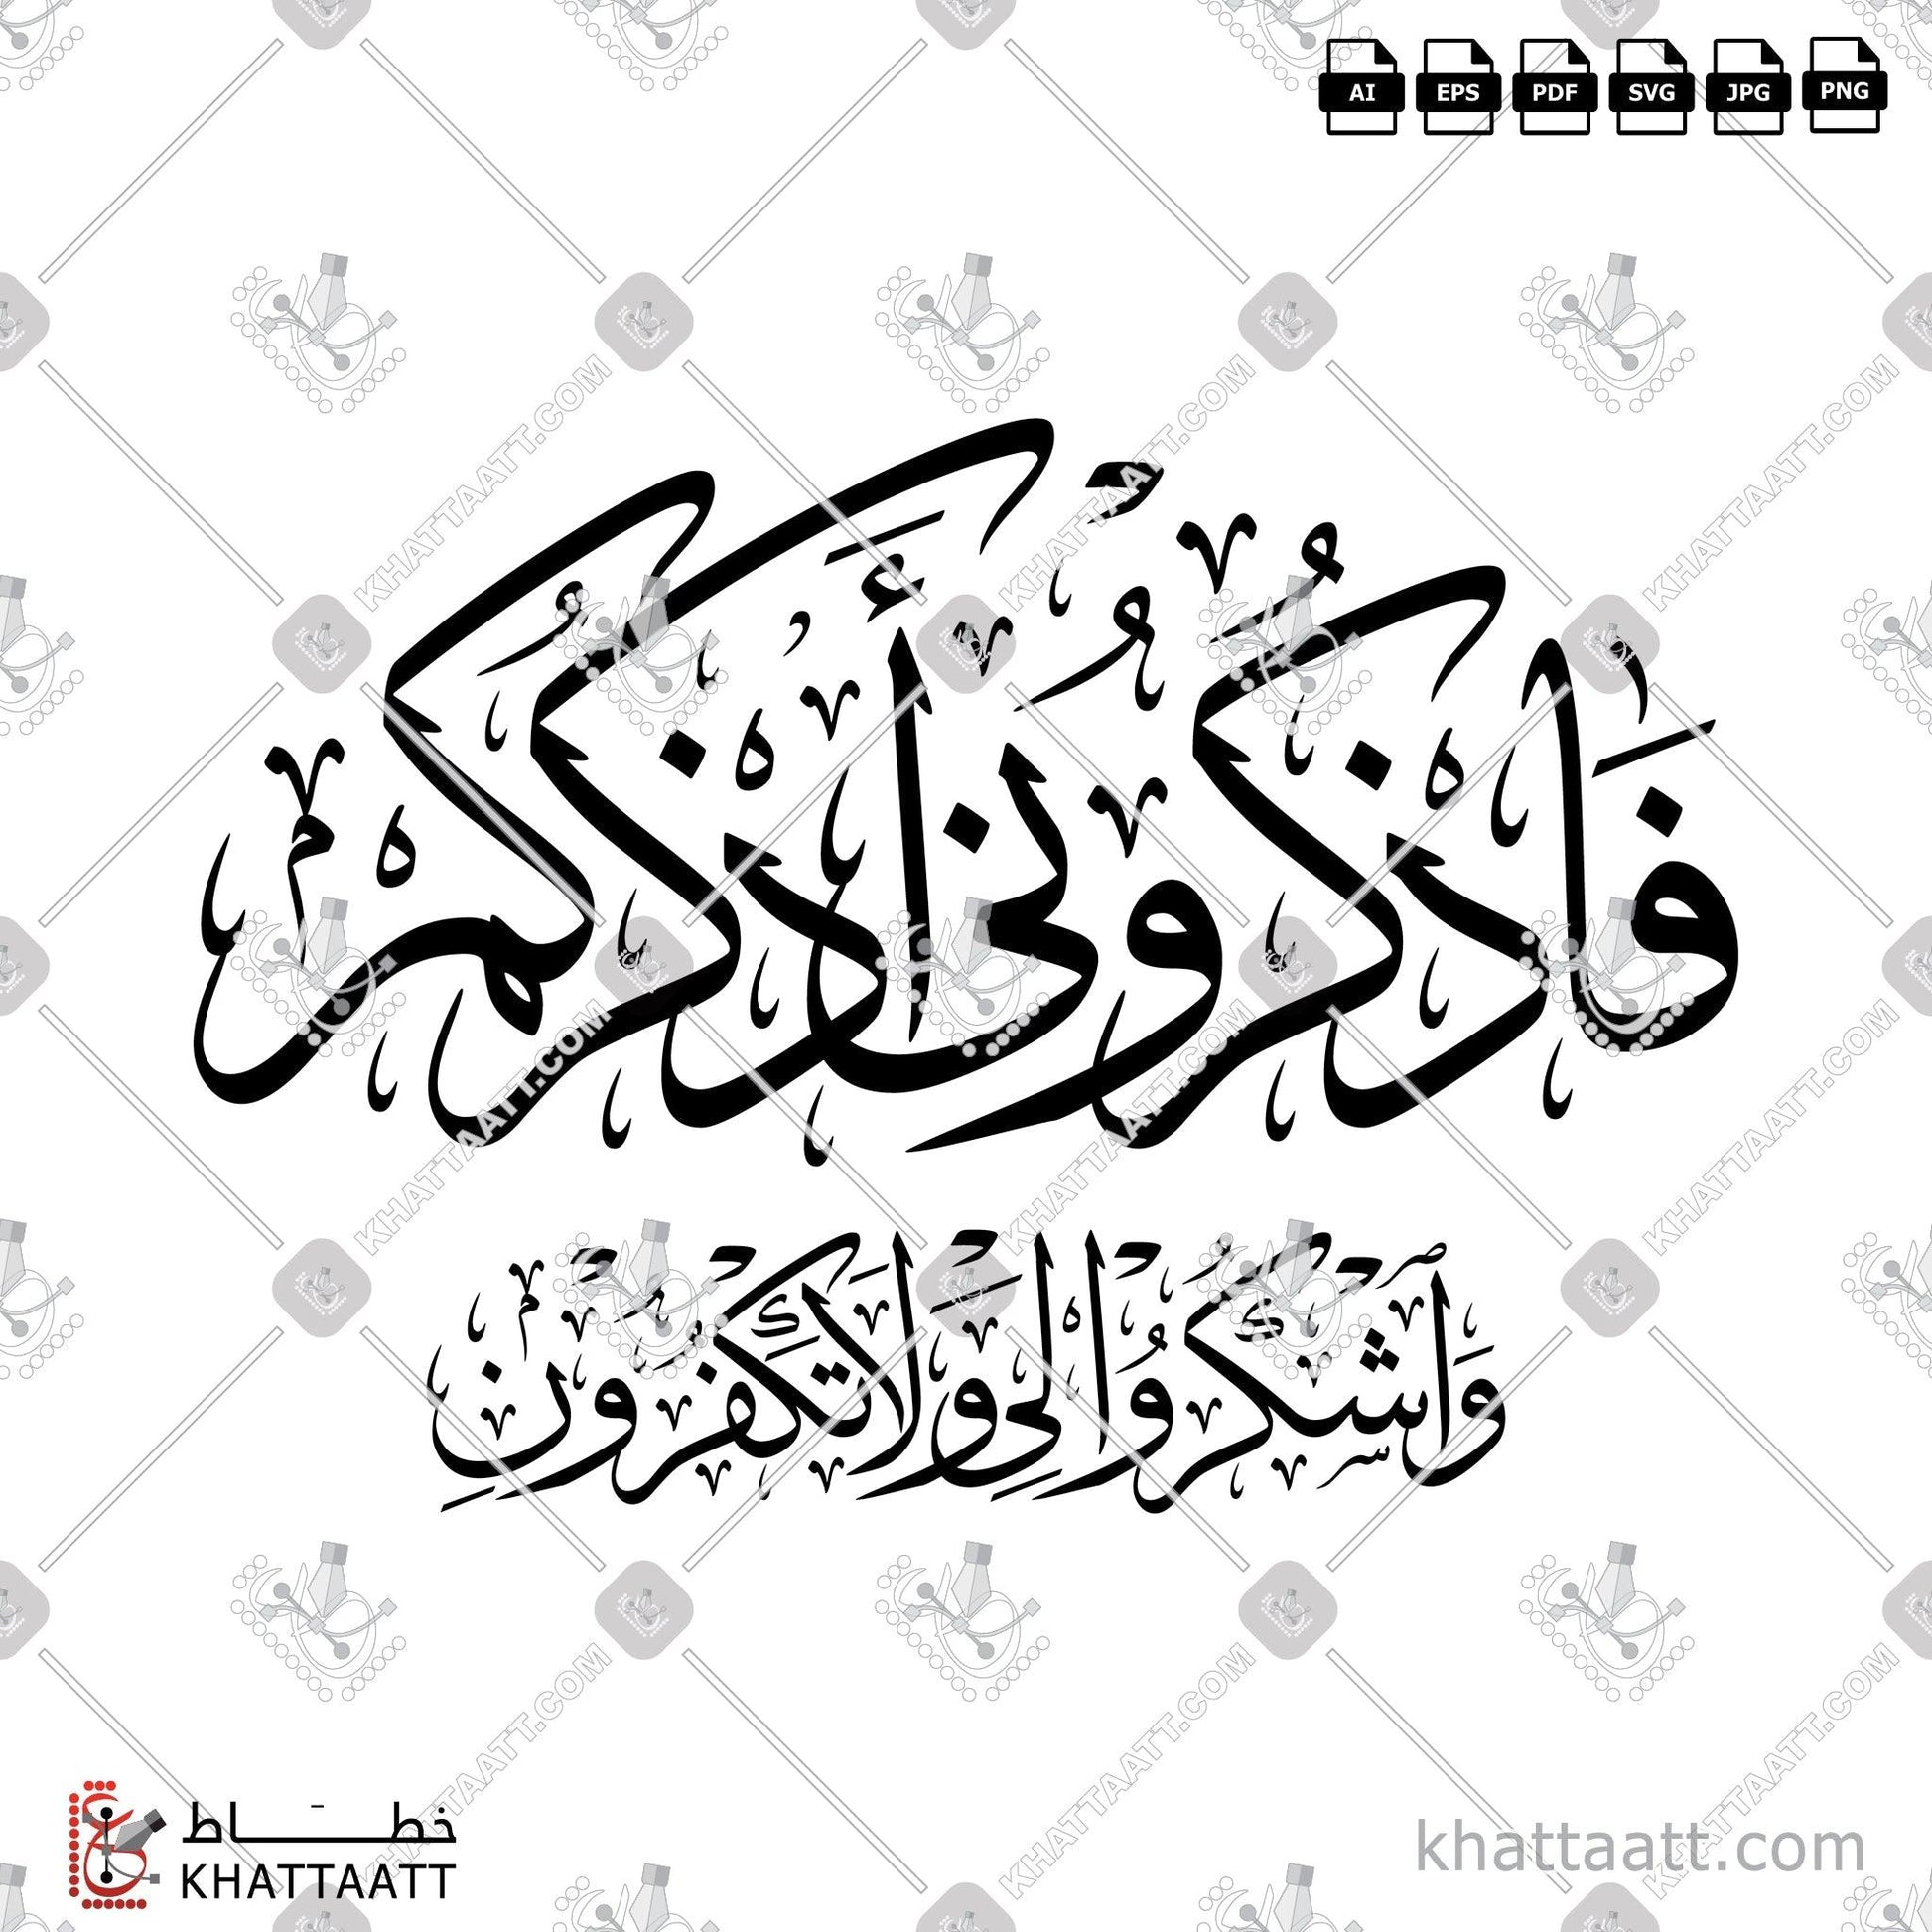 Download Arabic Calligraphy of فاذكروني أذكركم واشكروا لي ولا تكفرون in Thuluth - خط الثلث in vector and .png